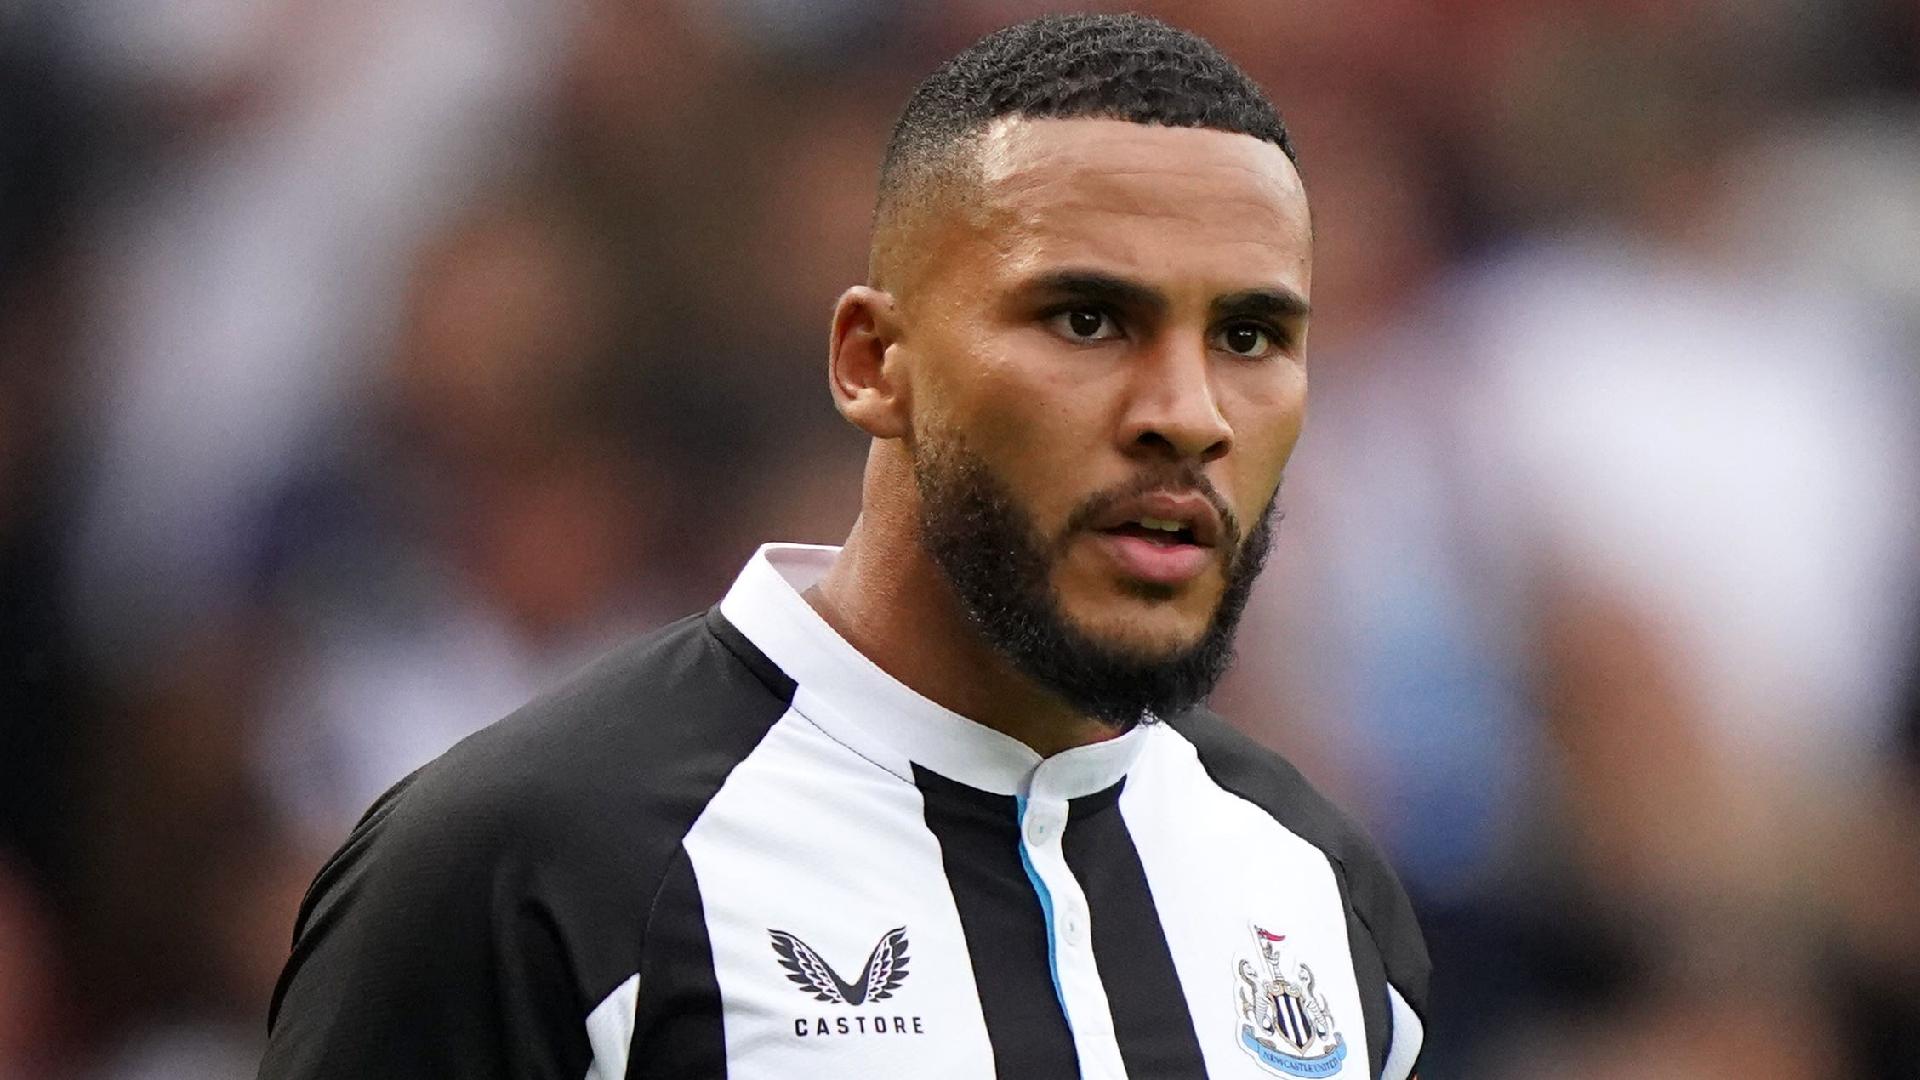 Police investigation after Newcastle club captain Jamaal Lascelles ‘attacked’